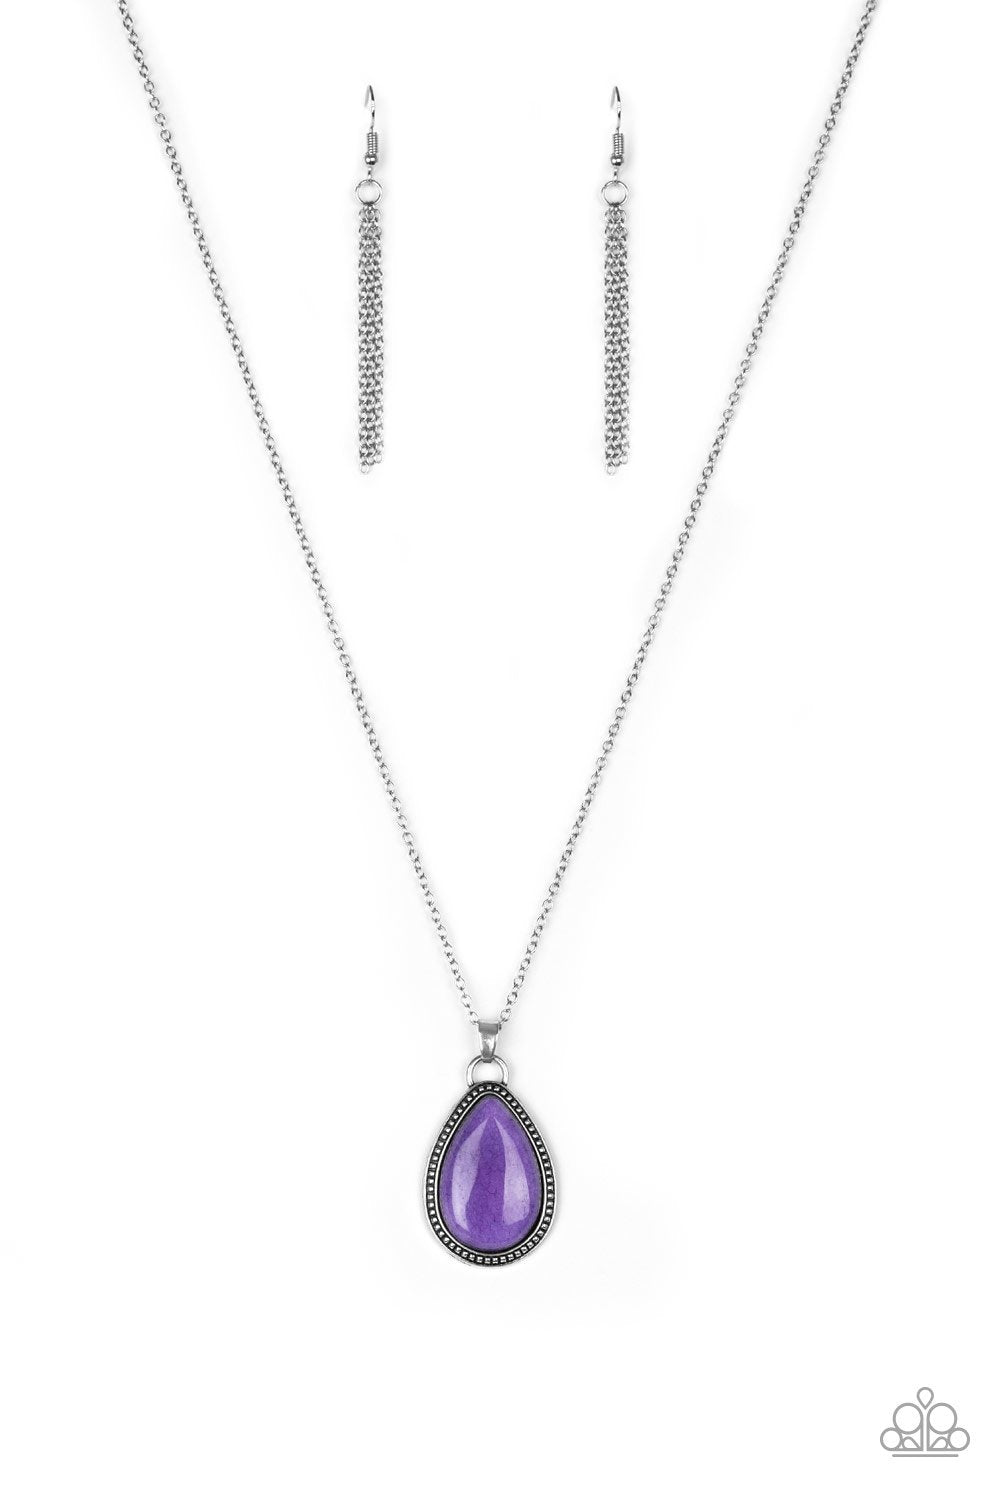 On The Home FRONTIER Purple Stone Teardrop Necklace - Paparazzi Accessories-CarasShop.com - $5 Jewelry by Cara Jewels